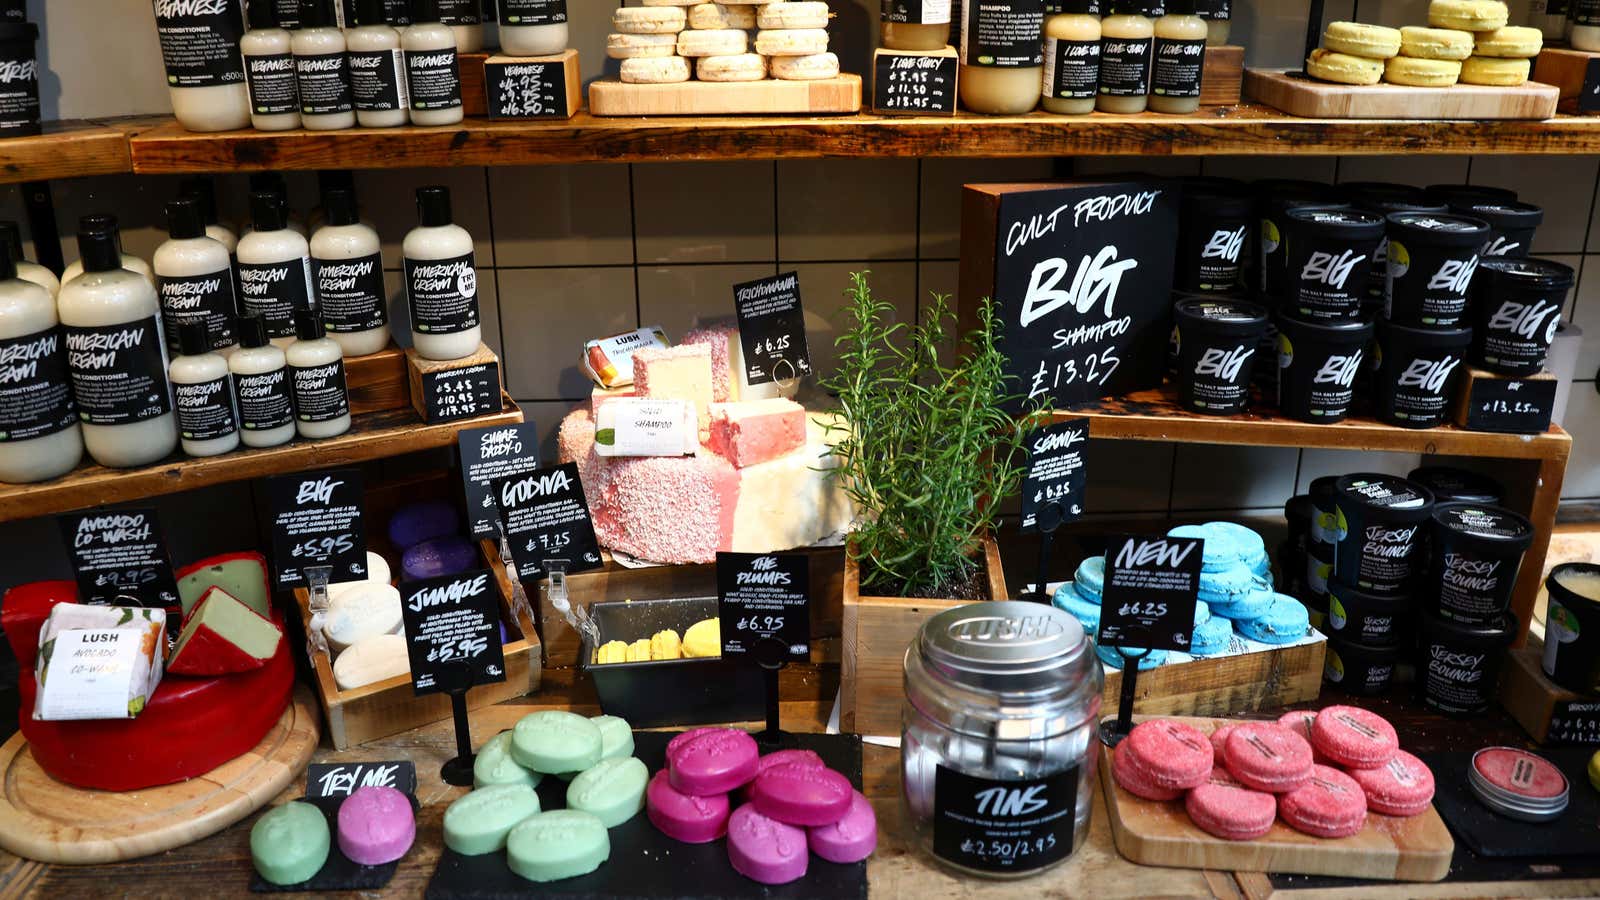 Lush is running a controversial campaign.